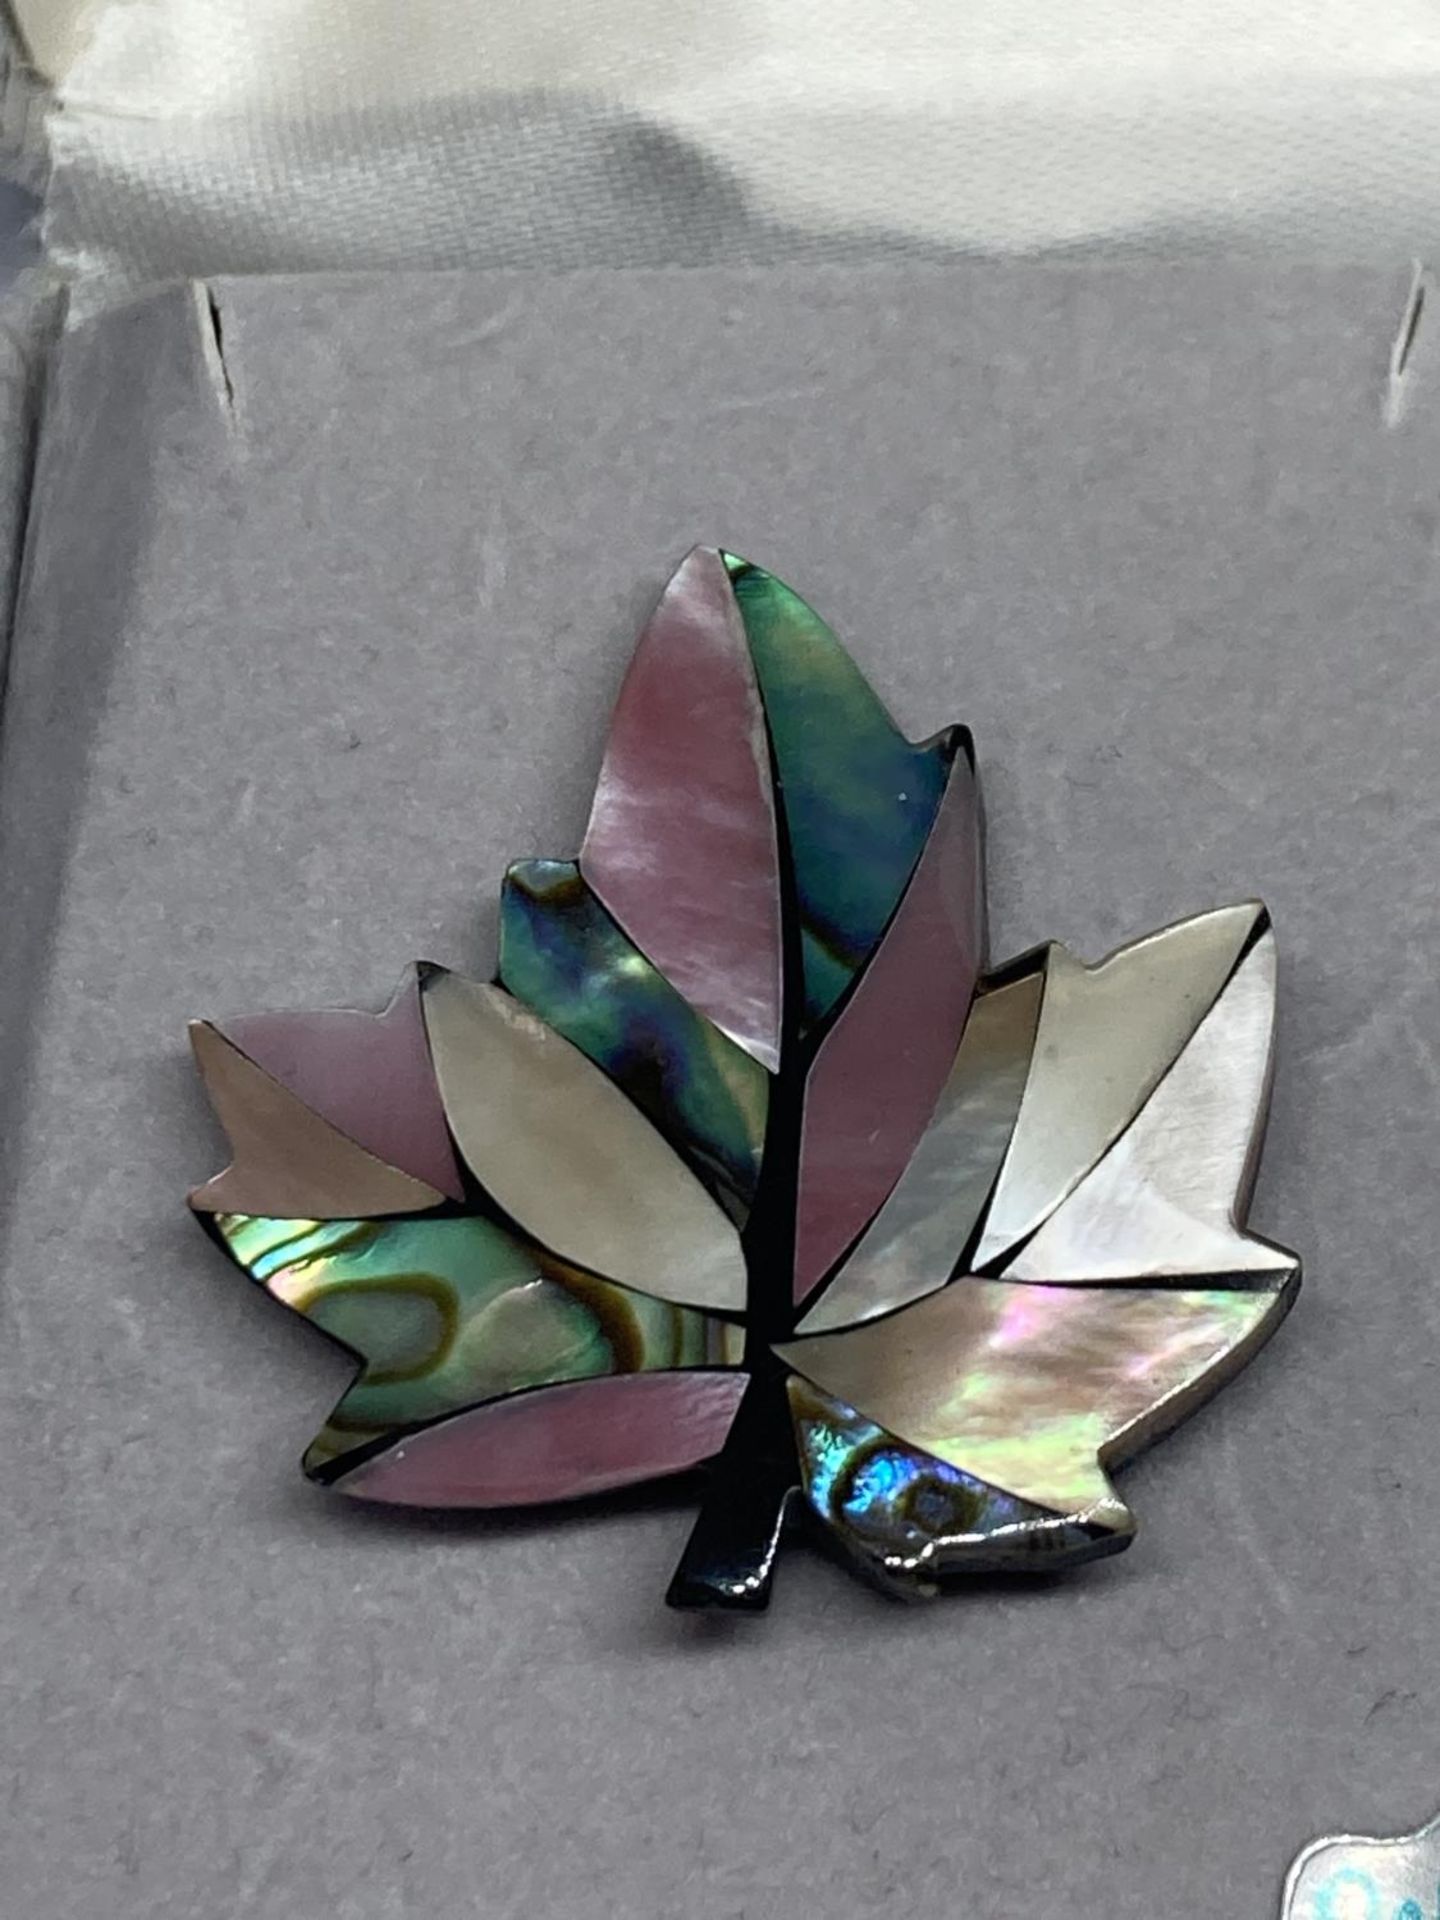 A MOTHER OF PEARL BROOCH IN A PRESENTATION BOX - Image 2 of 2